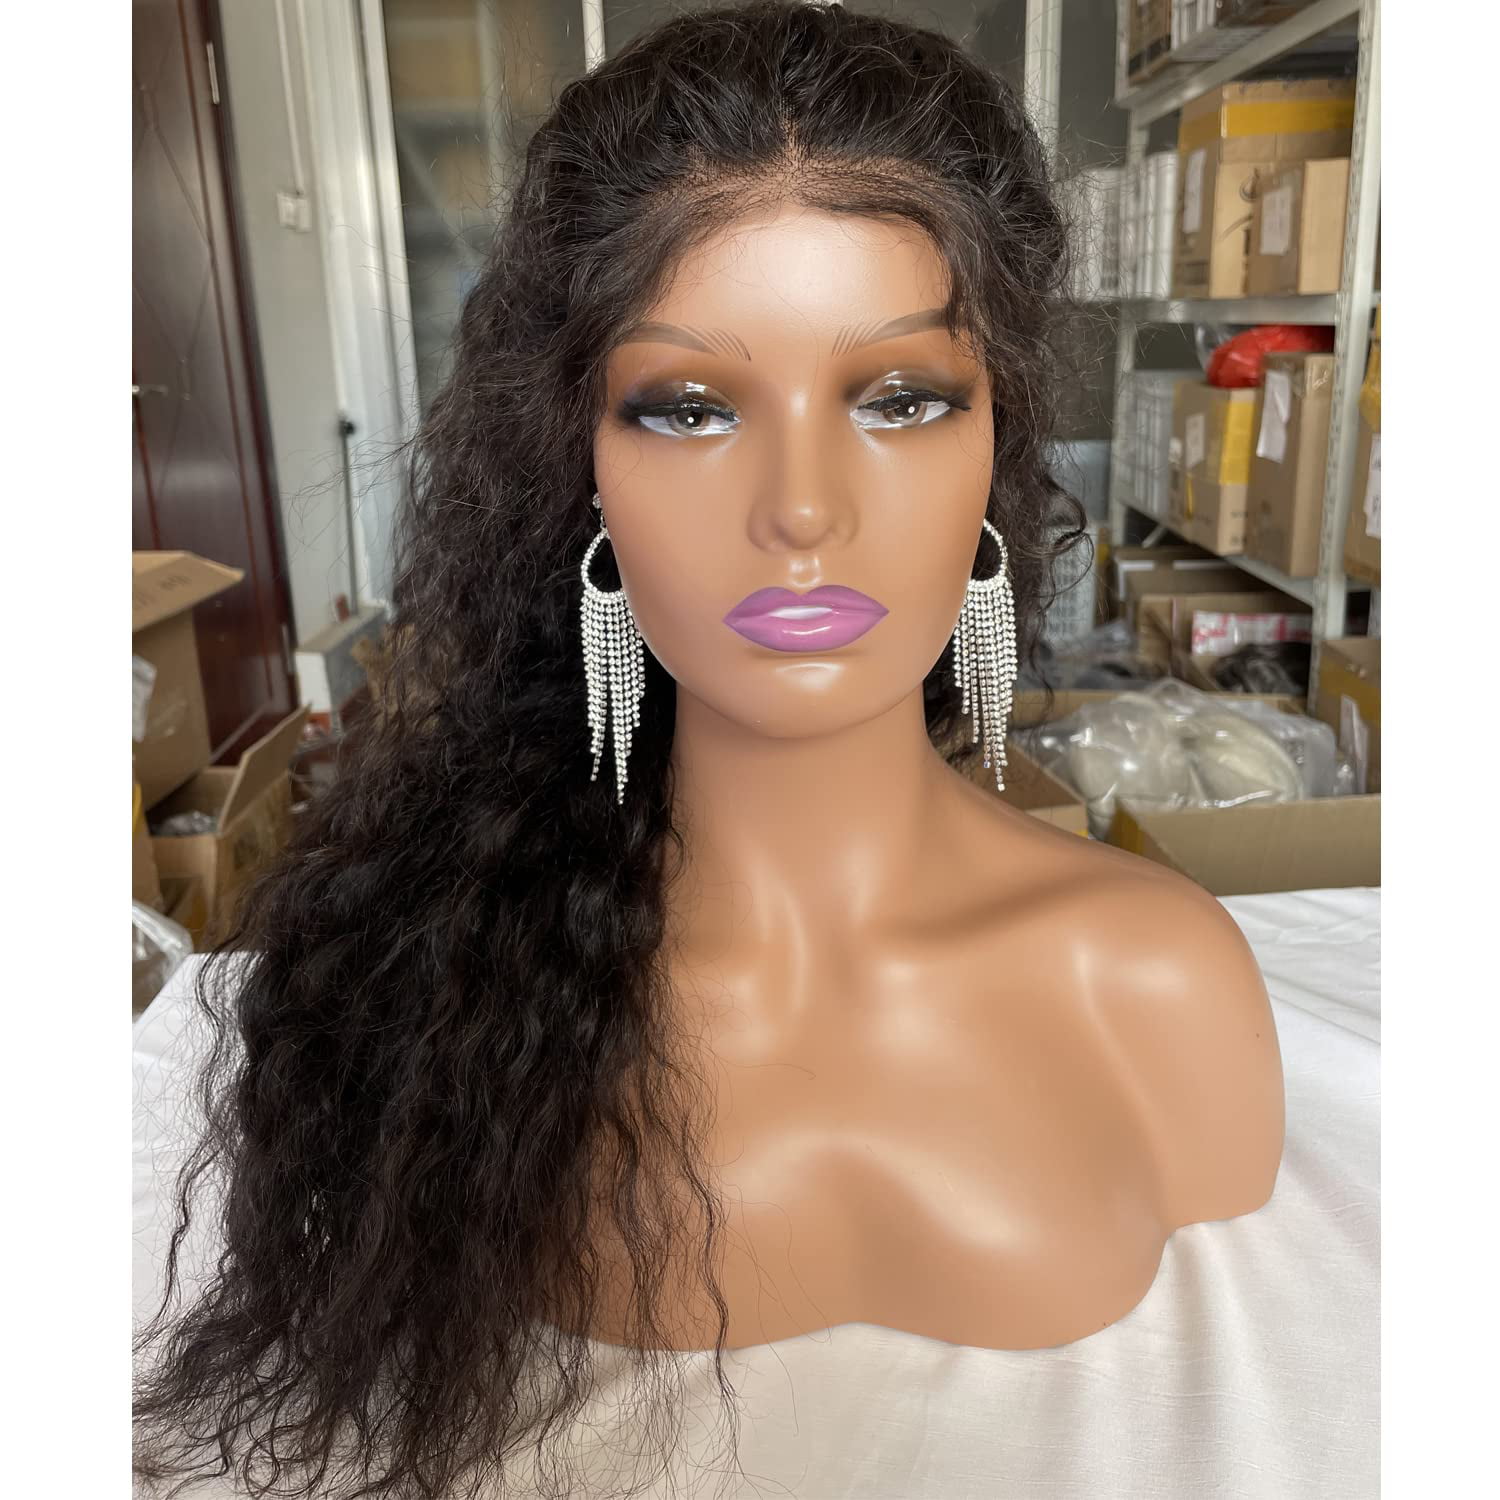 MN-062 Realistic Female Mannequin Head Form with Pierced Ears